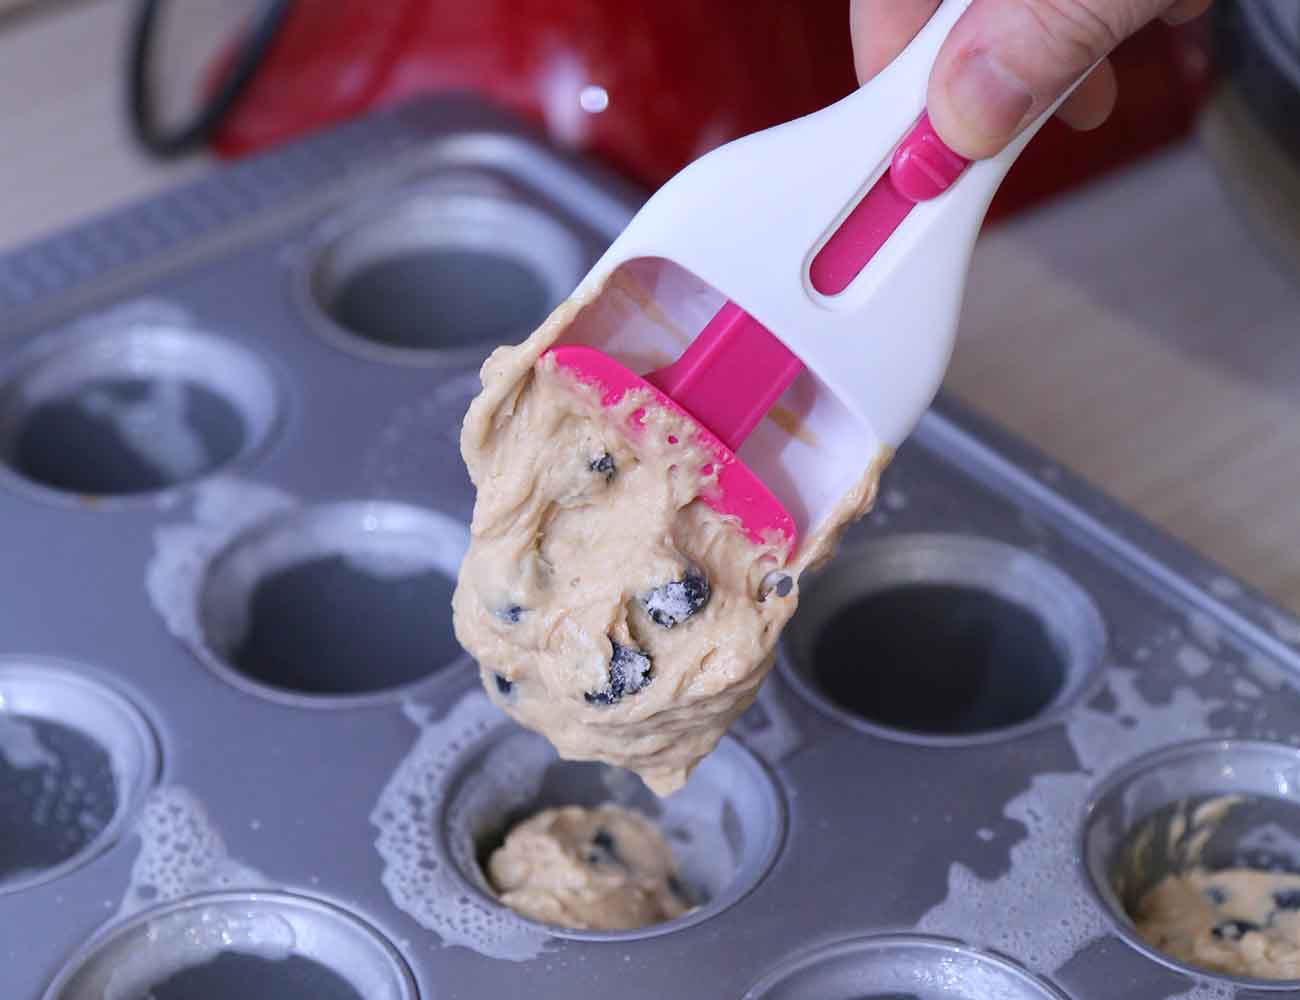 Tovolo Cupcake Scoop For Tidy Scooping